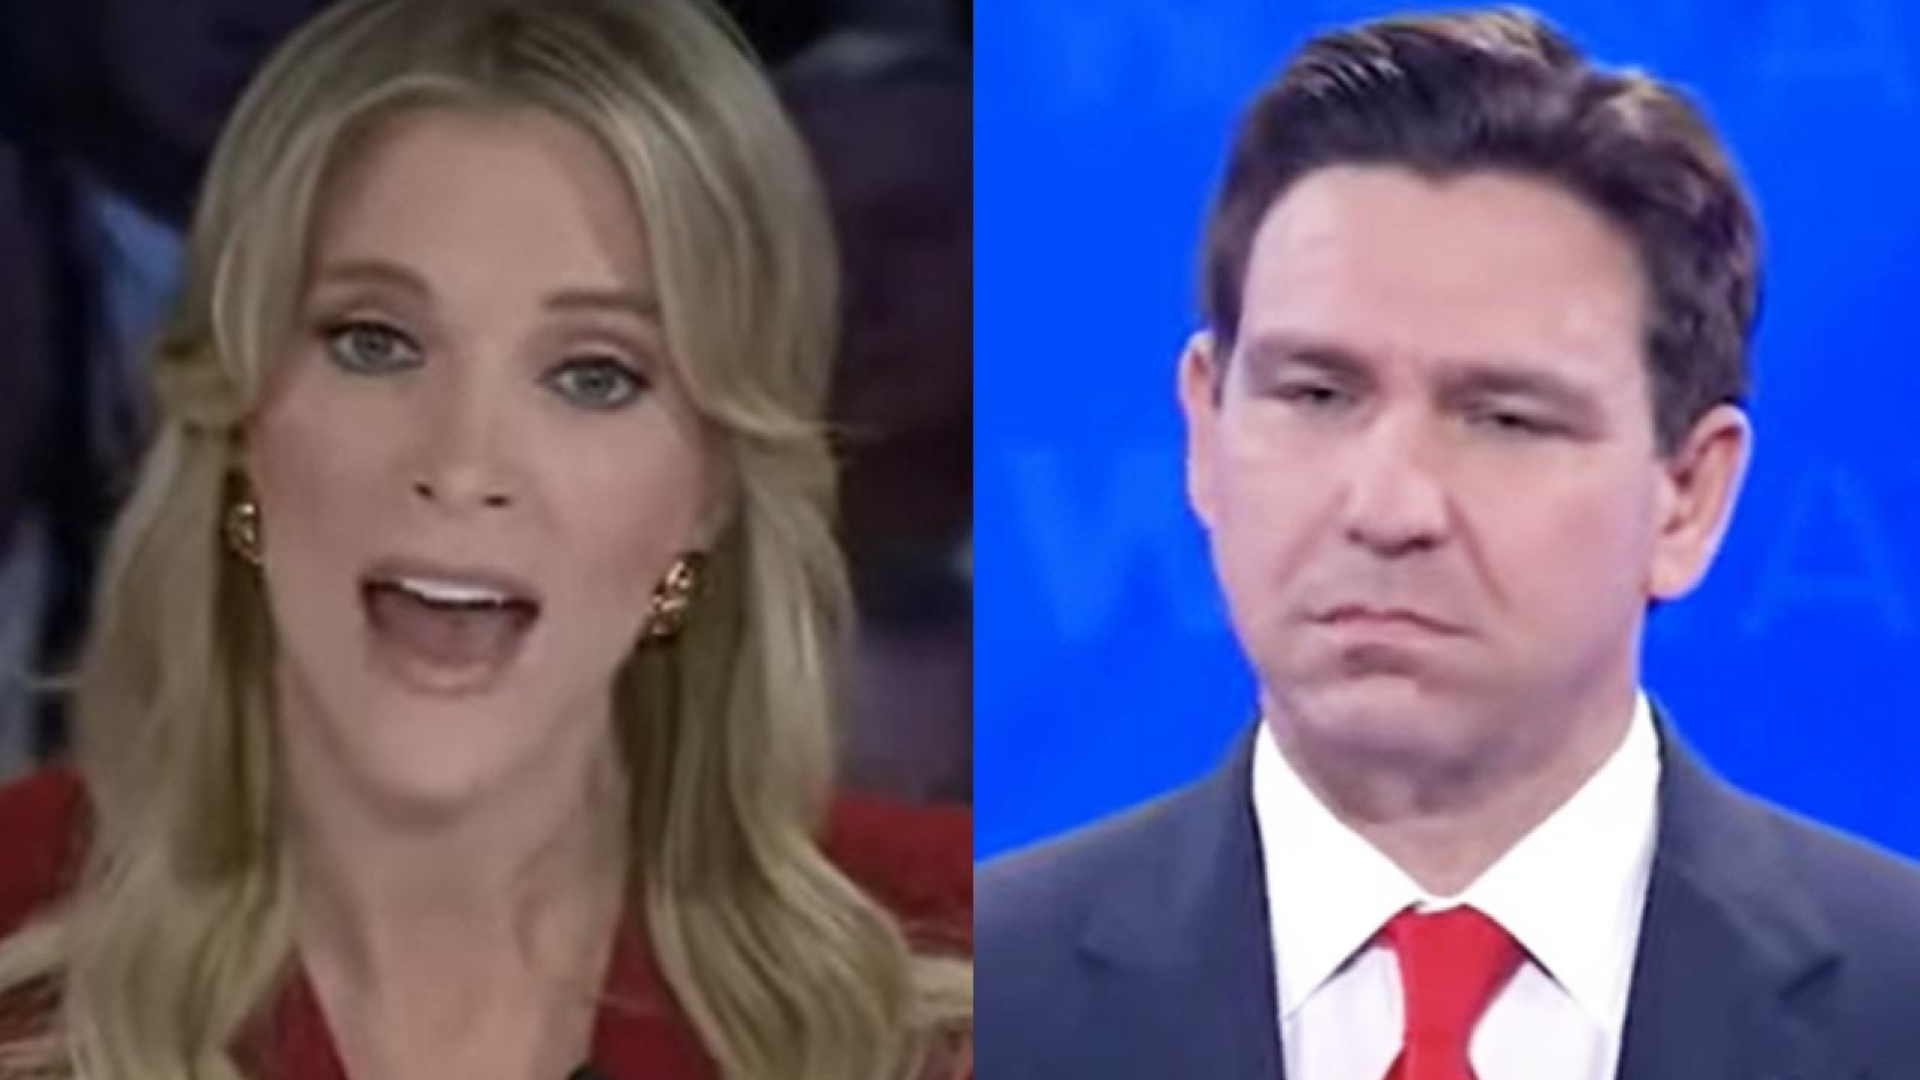 Megyn Kelly's co-host commented that Ron DeSantis made a face like some ...